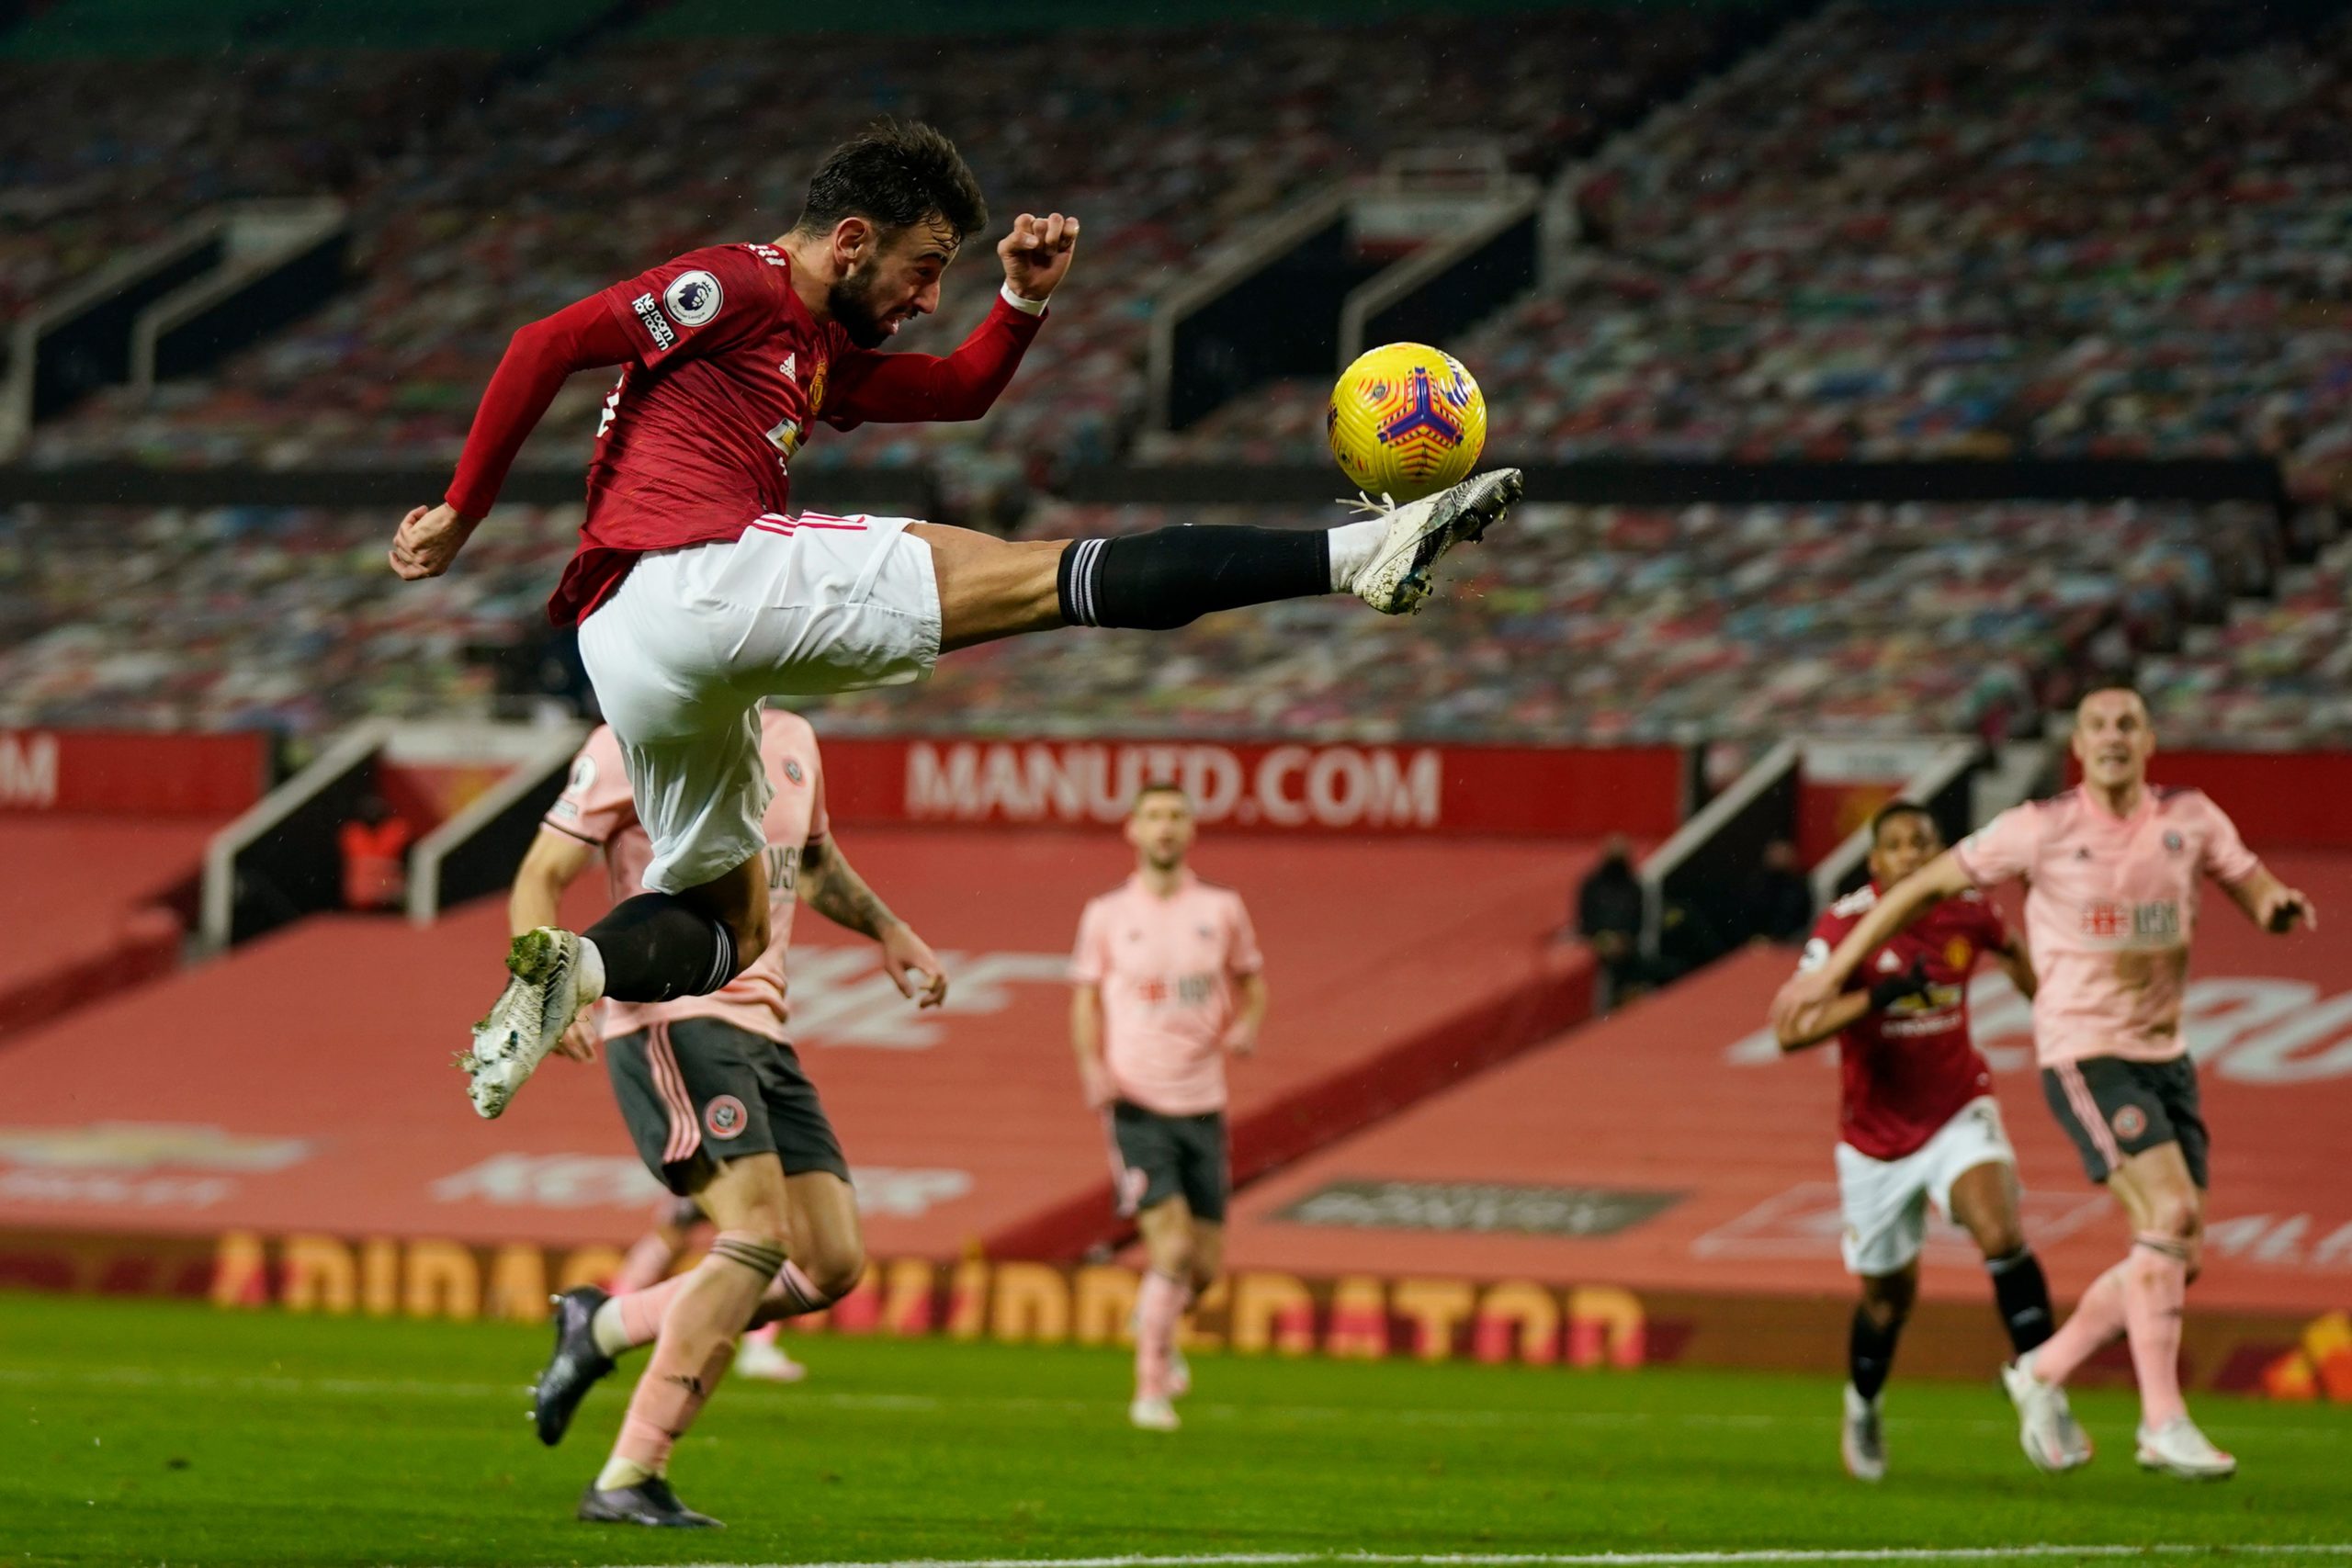 Manchester United Players Rated In Loss To Sheffield United (Bruno Fernandes can be seen in the picture)